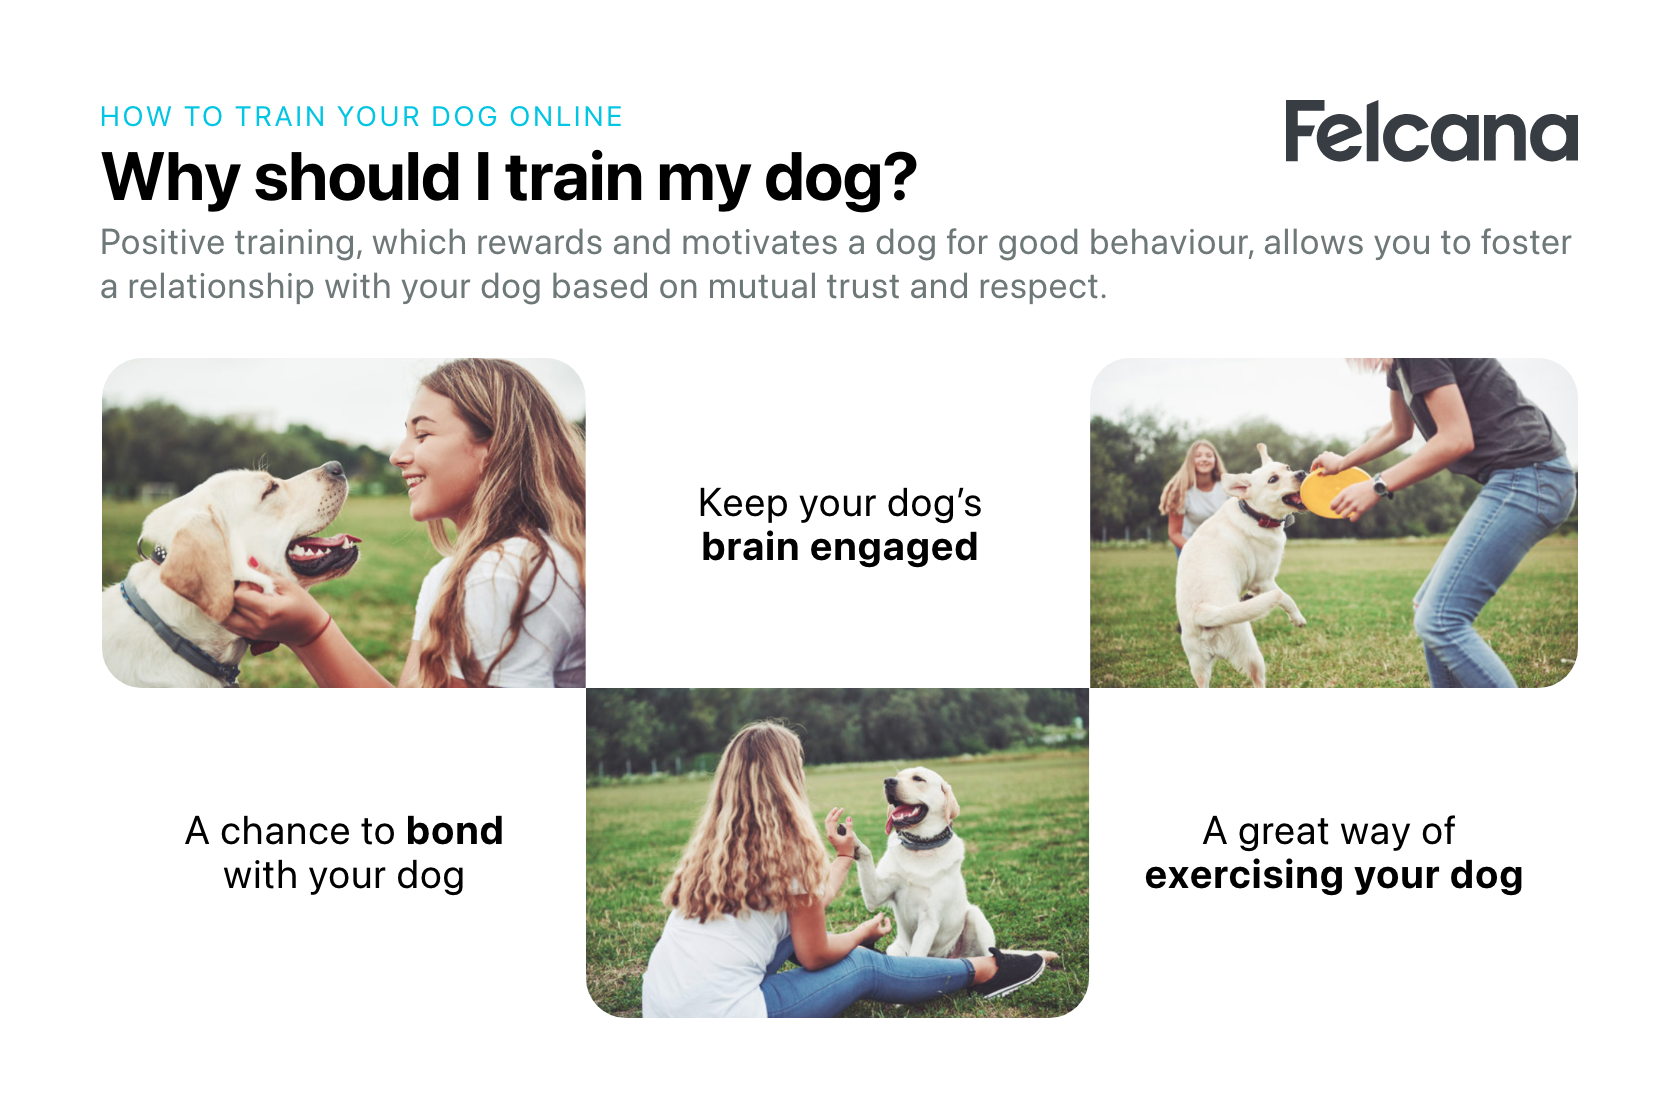 Benefits of training your dog includes bonding time with your dog, keep your dog's brain engaged, exercising your dog